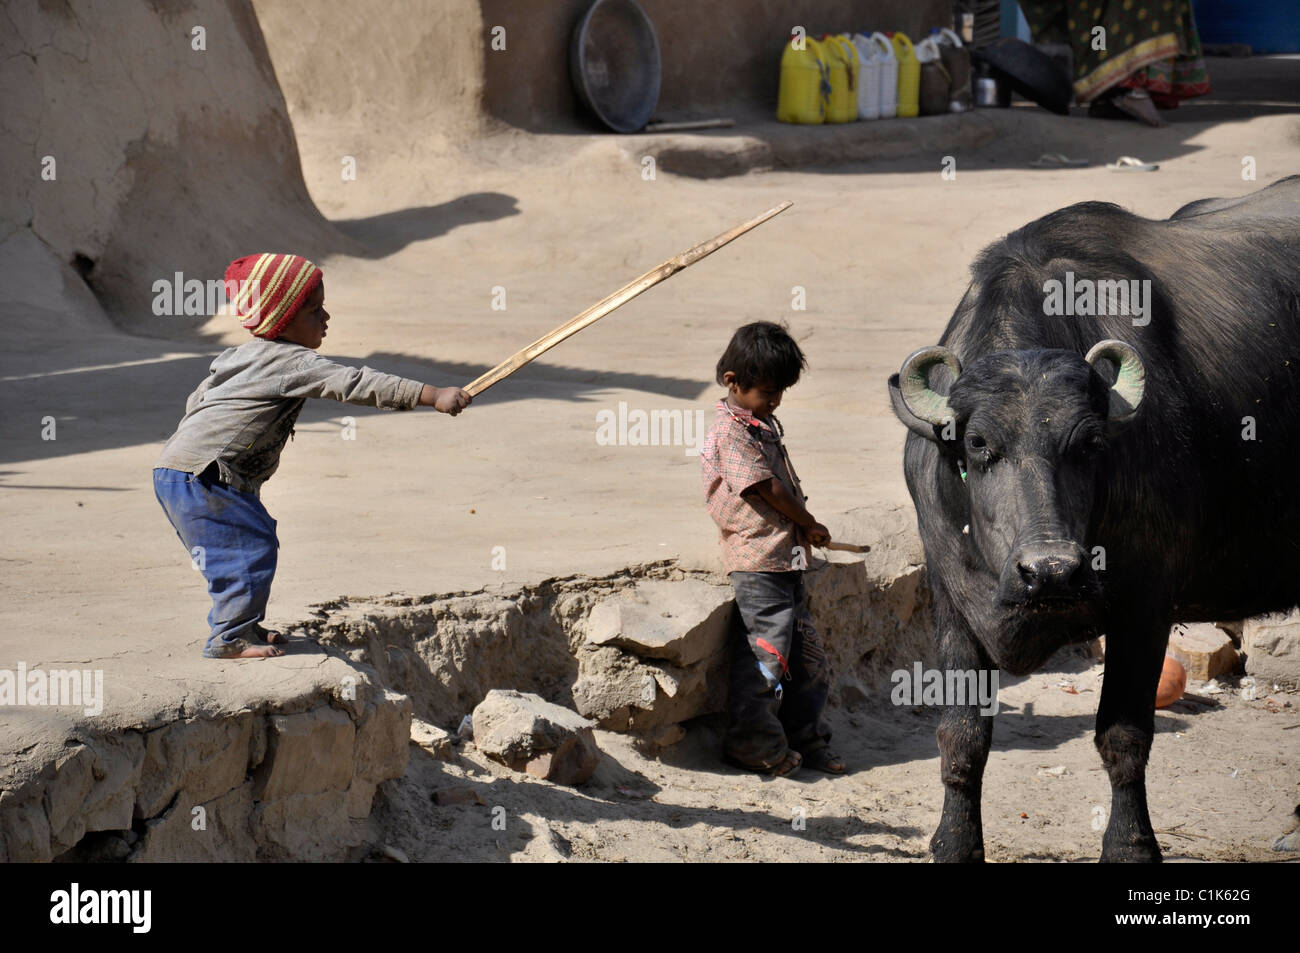 One small boy showing a stick to a Buffalo in rural India Stock Photo